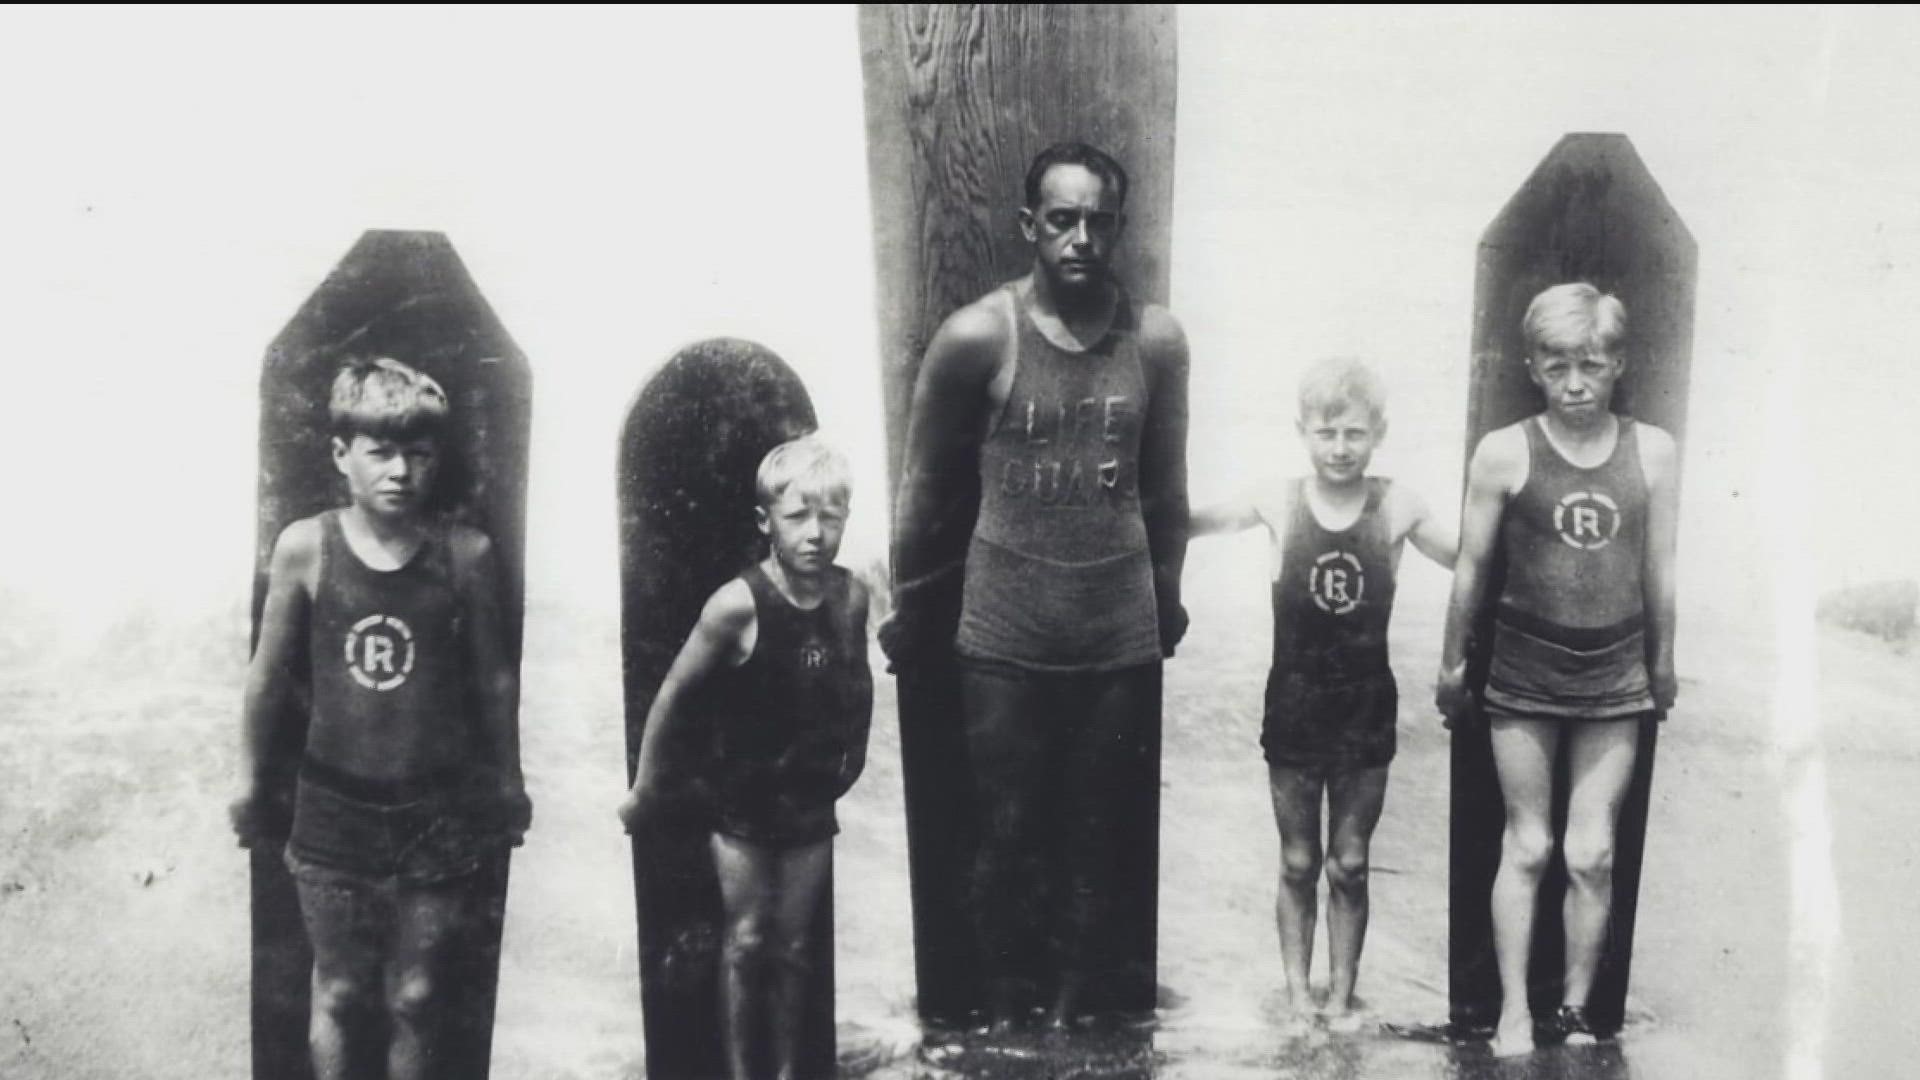 Freeth taught surfing to lifeguards and others beginning in 1907